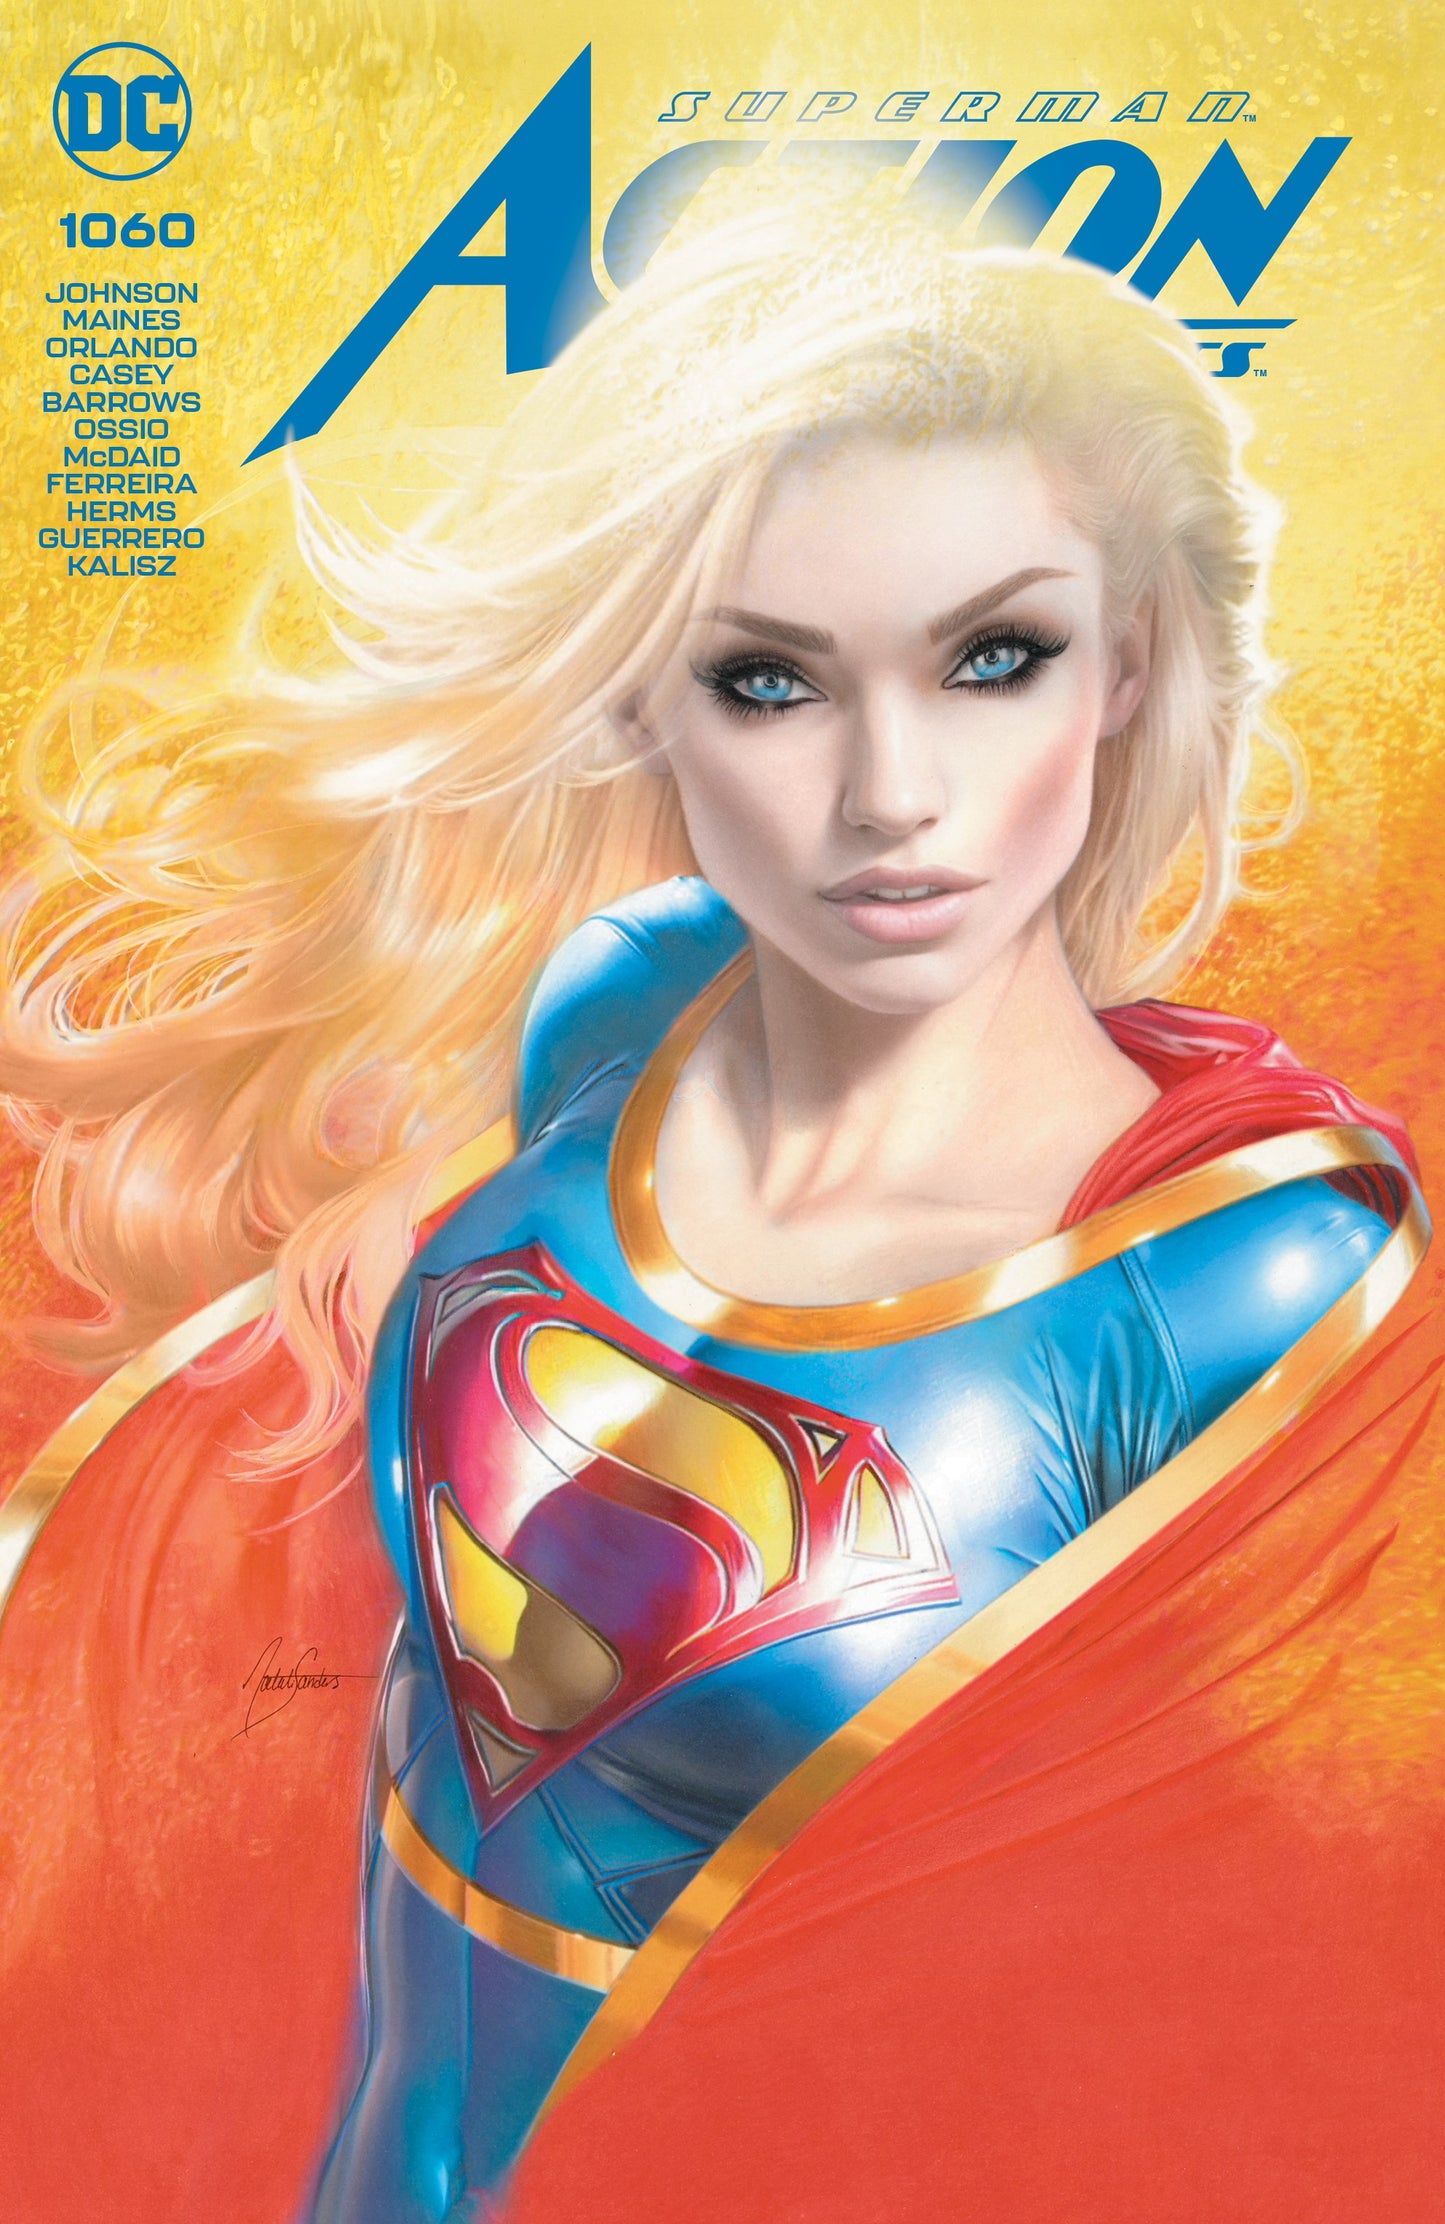 ACTION COMICS #1060 NATALI SANDERS HOMAGE VARIANT LIMITED TO 500 COPIES WITH NUMBERED COA